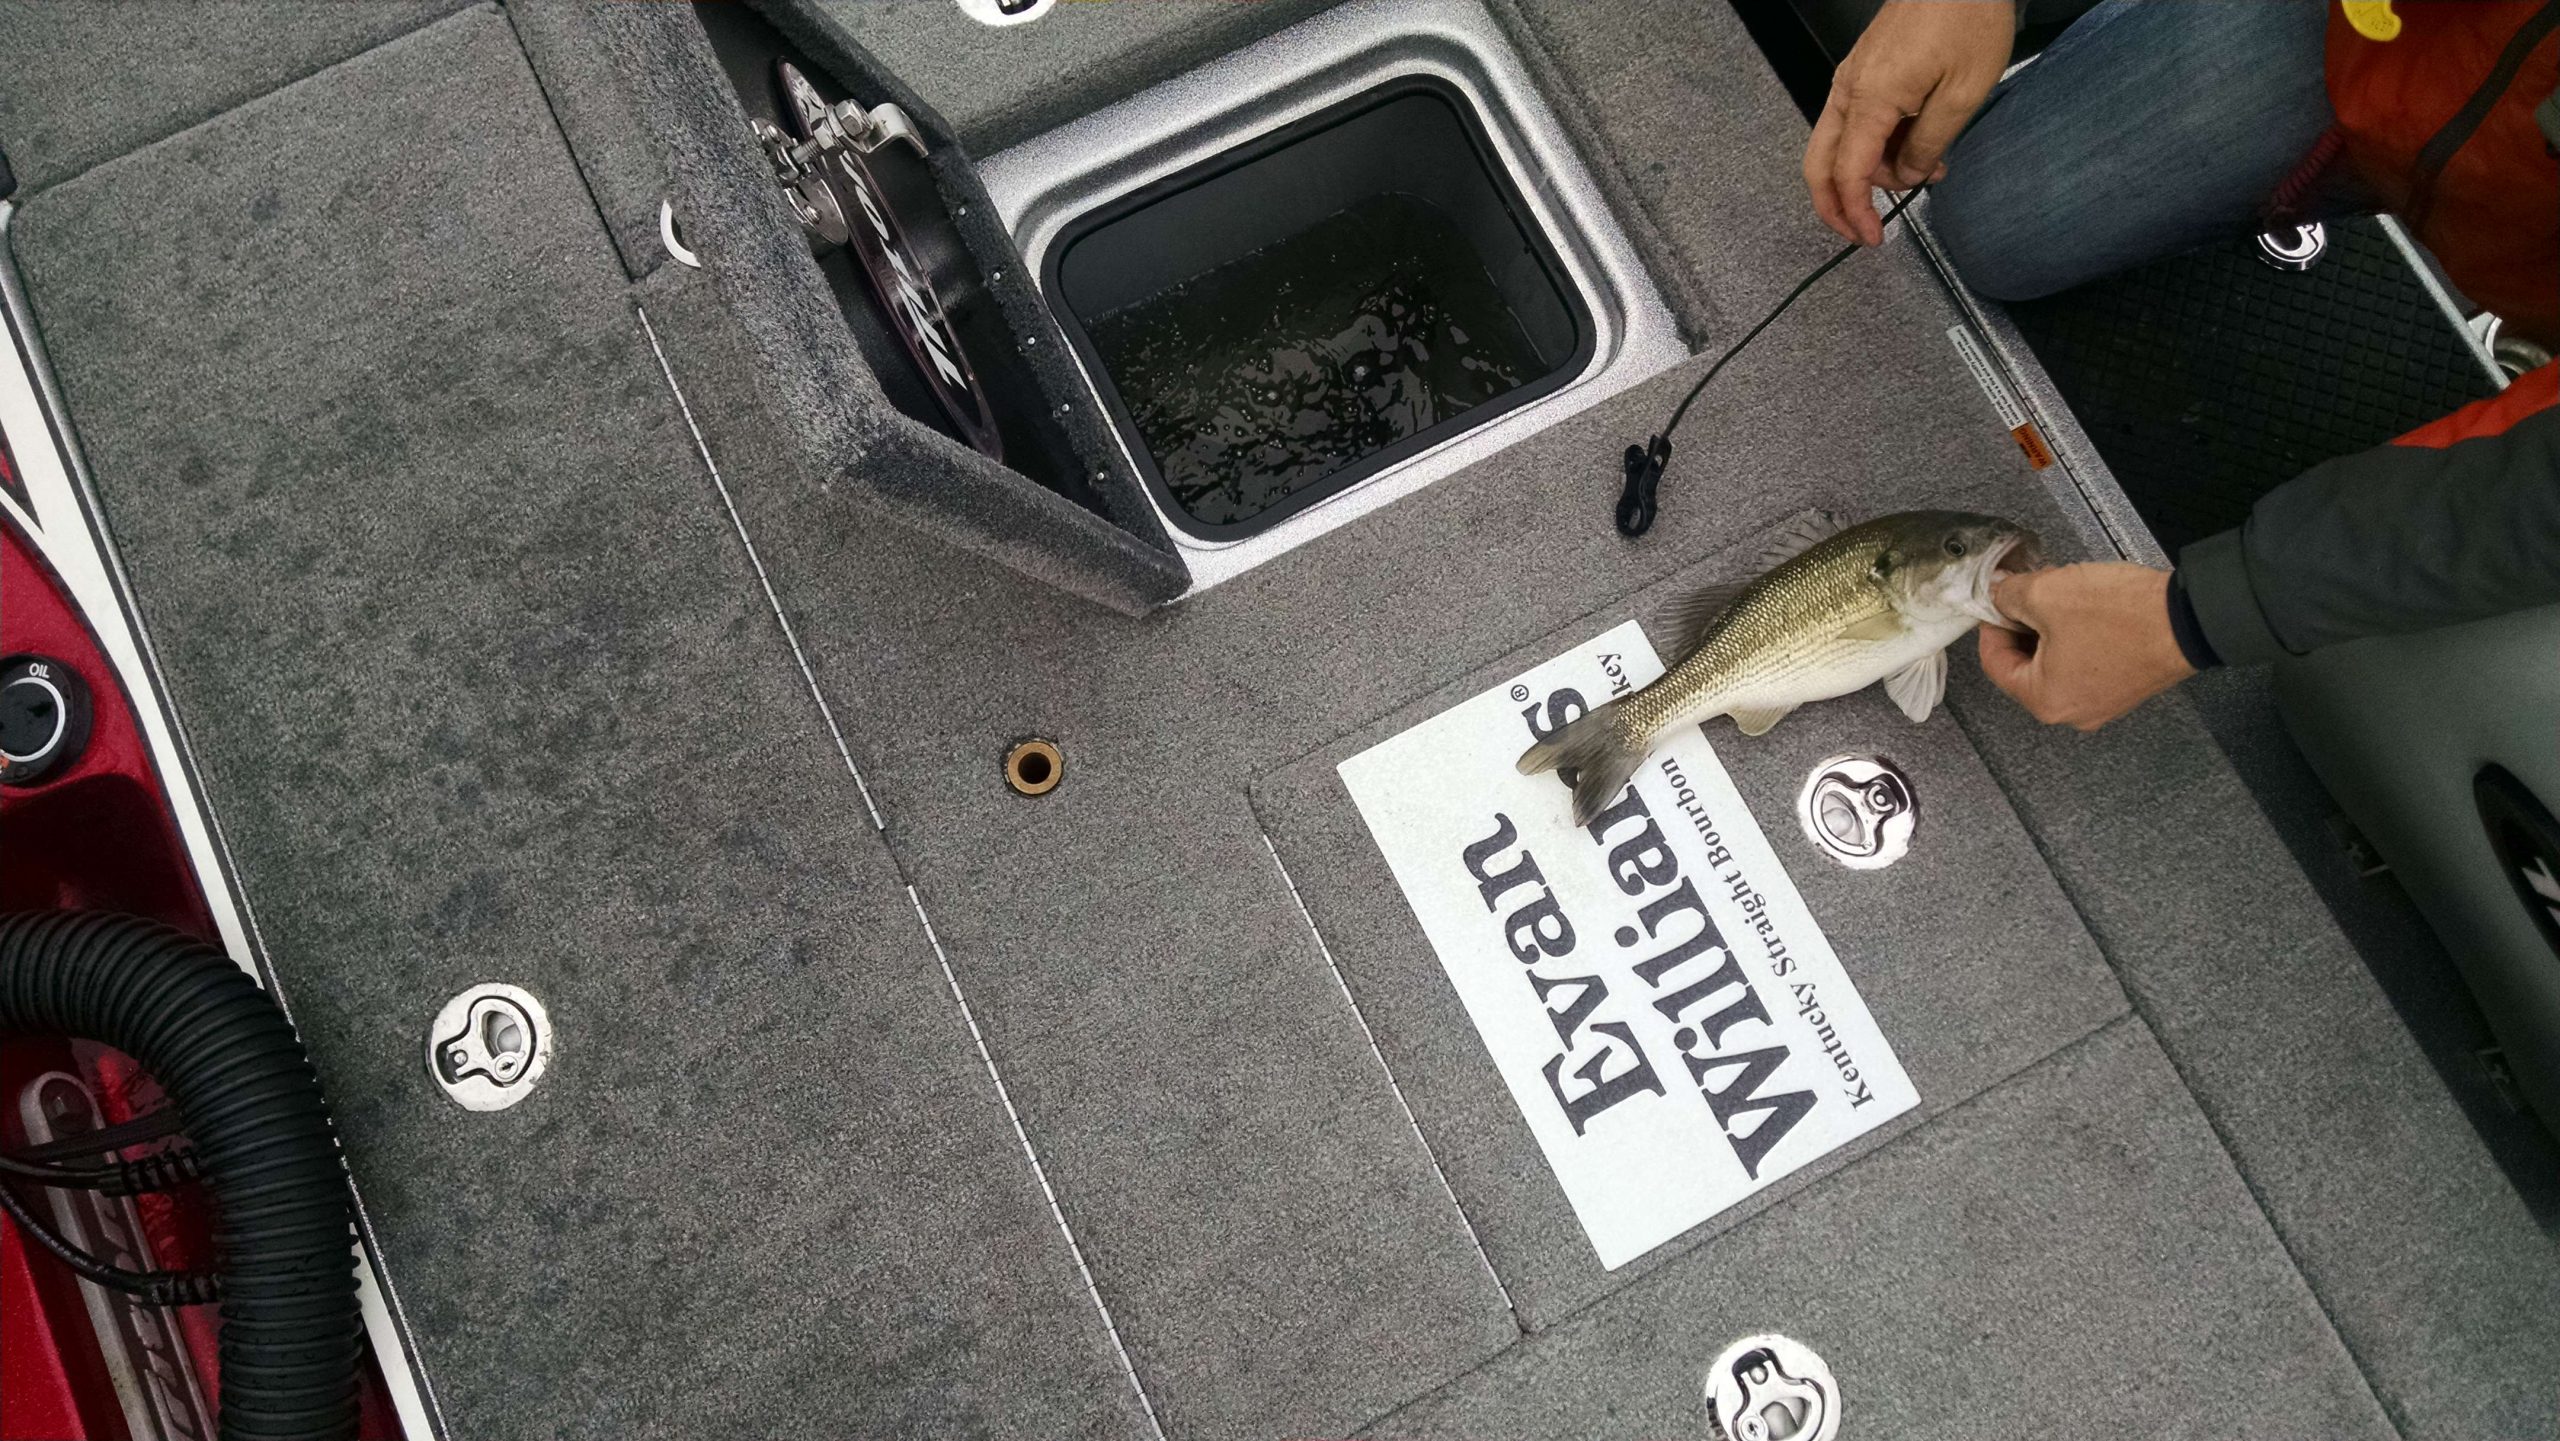 Hank's no. 5 is a small spotted bass. He'll go back in a few!